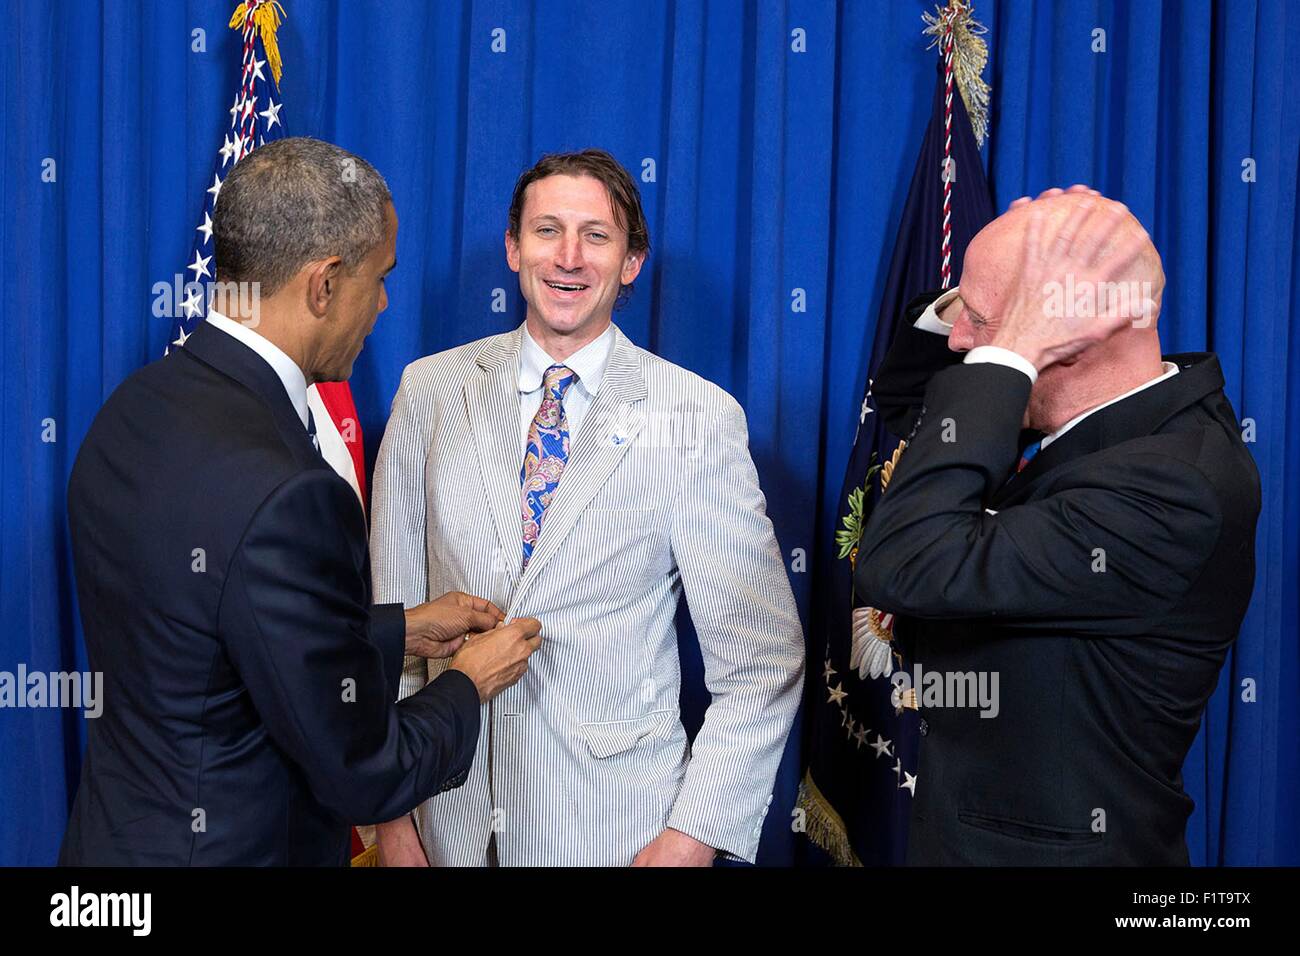 U.S. President Barack Obama adjusts a guest's jacket after he got caught in the rain prior to a town hall meeting with online communities 'BlogHer' and 'SheKnows' to discuss working families issues at ImaginOn April 15, 2015 in Charlotte, N.C. Stock Photo